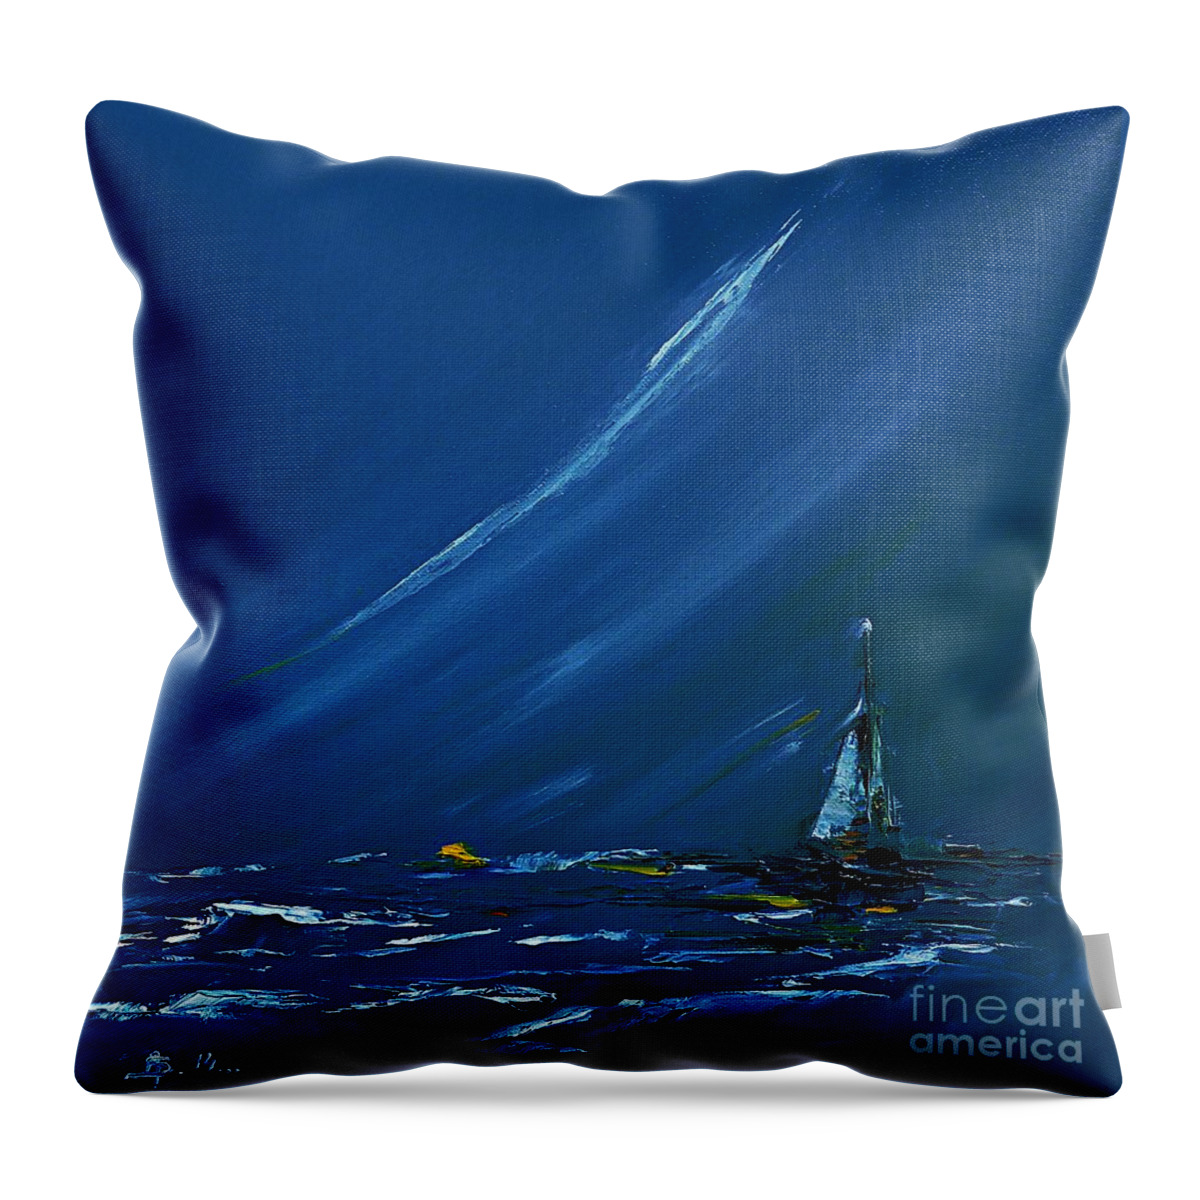 Sea Throw Pillow featuring the painting Sailing by Amalia Suruceanu